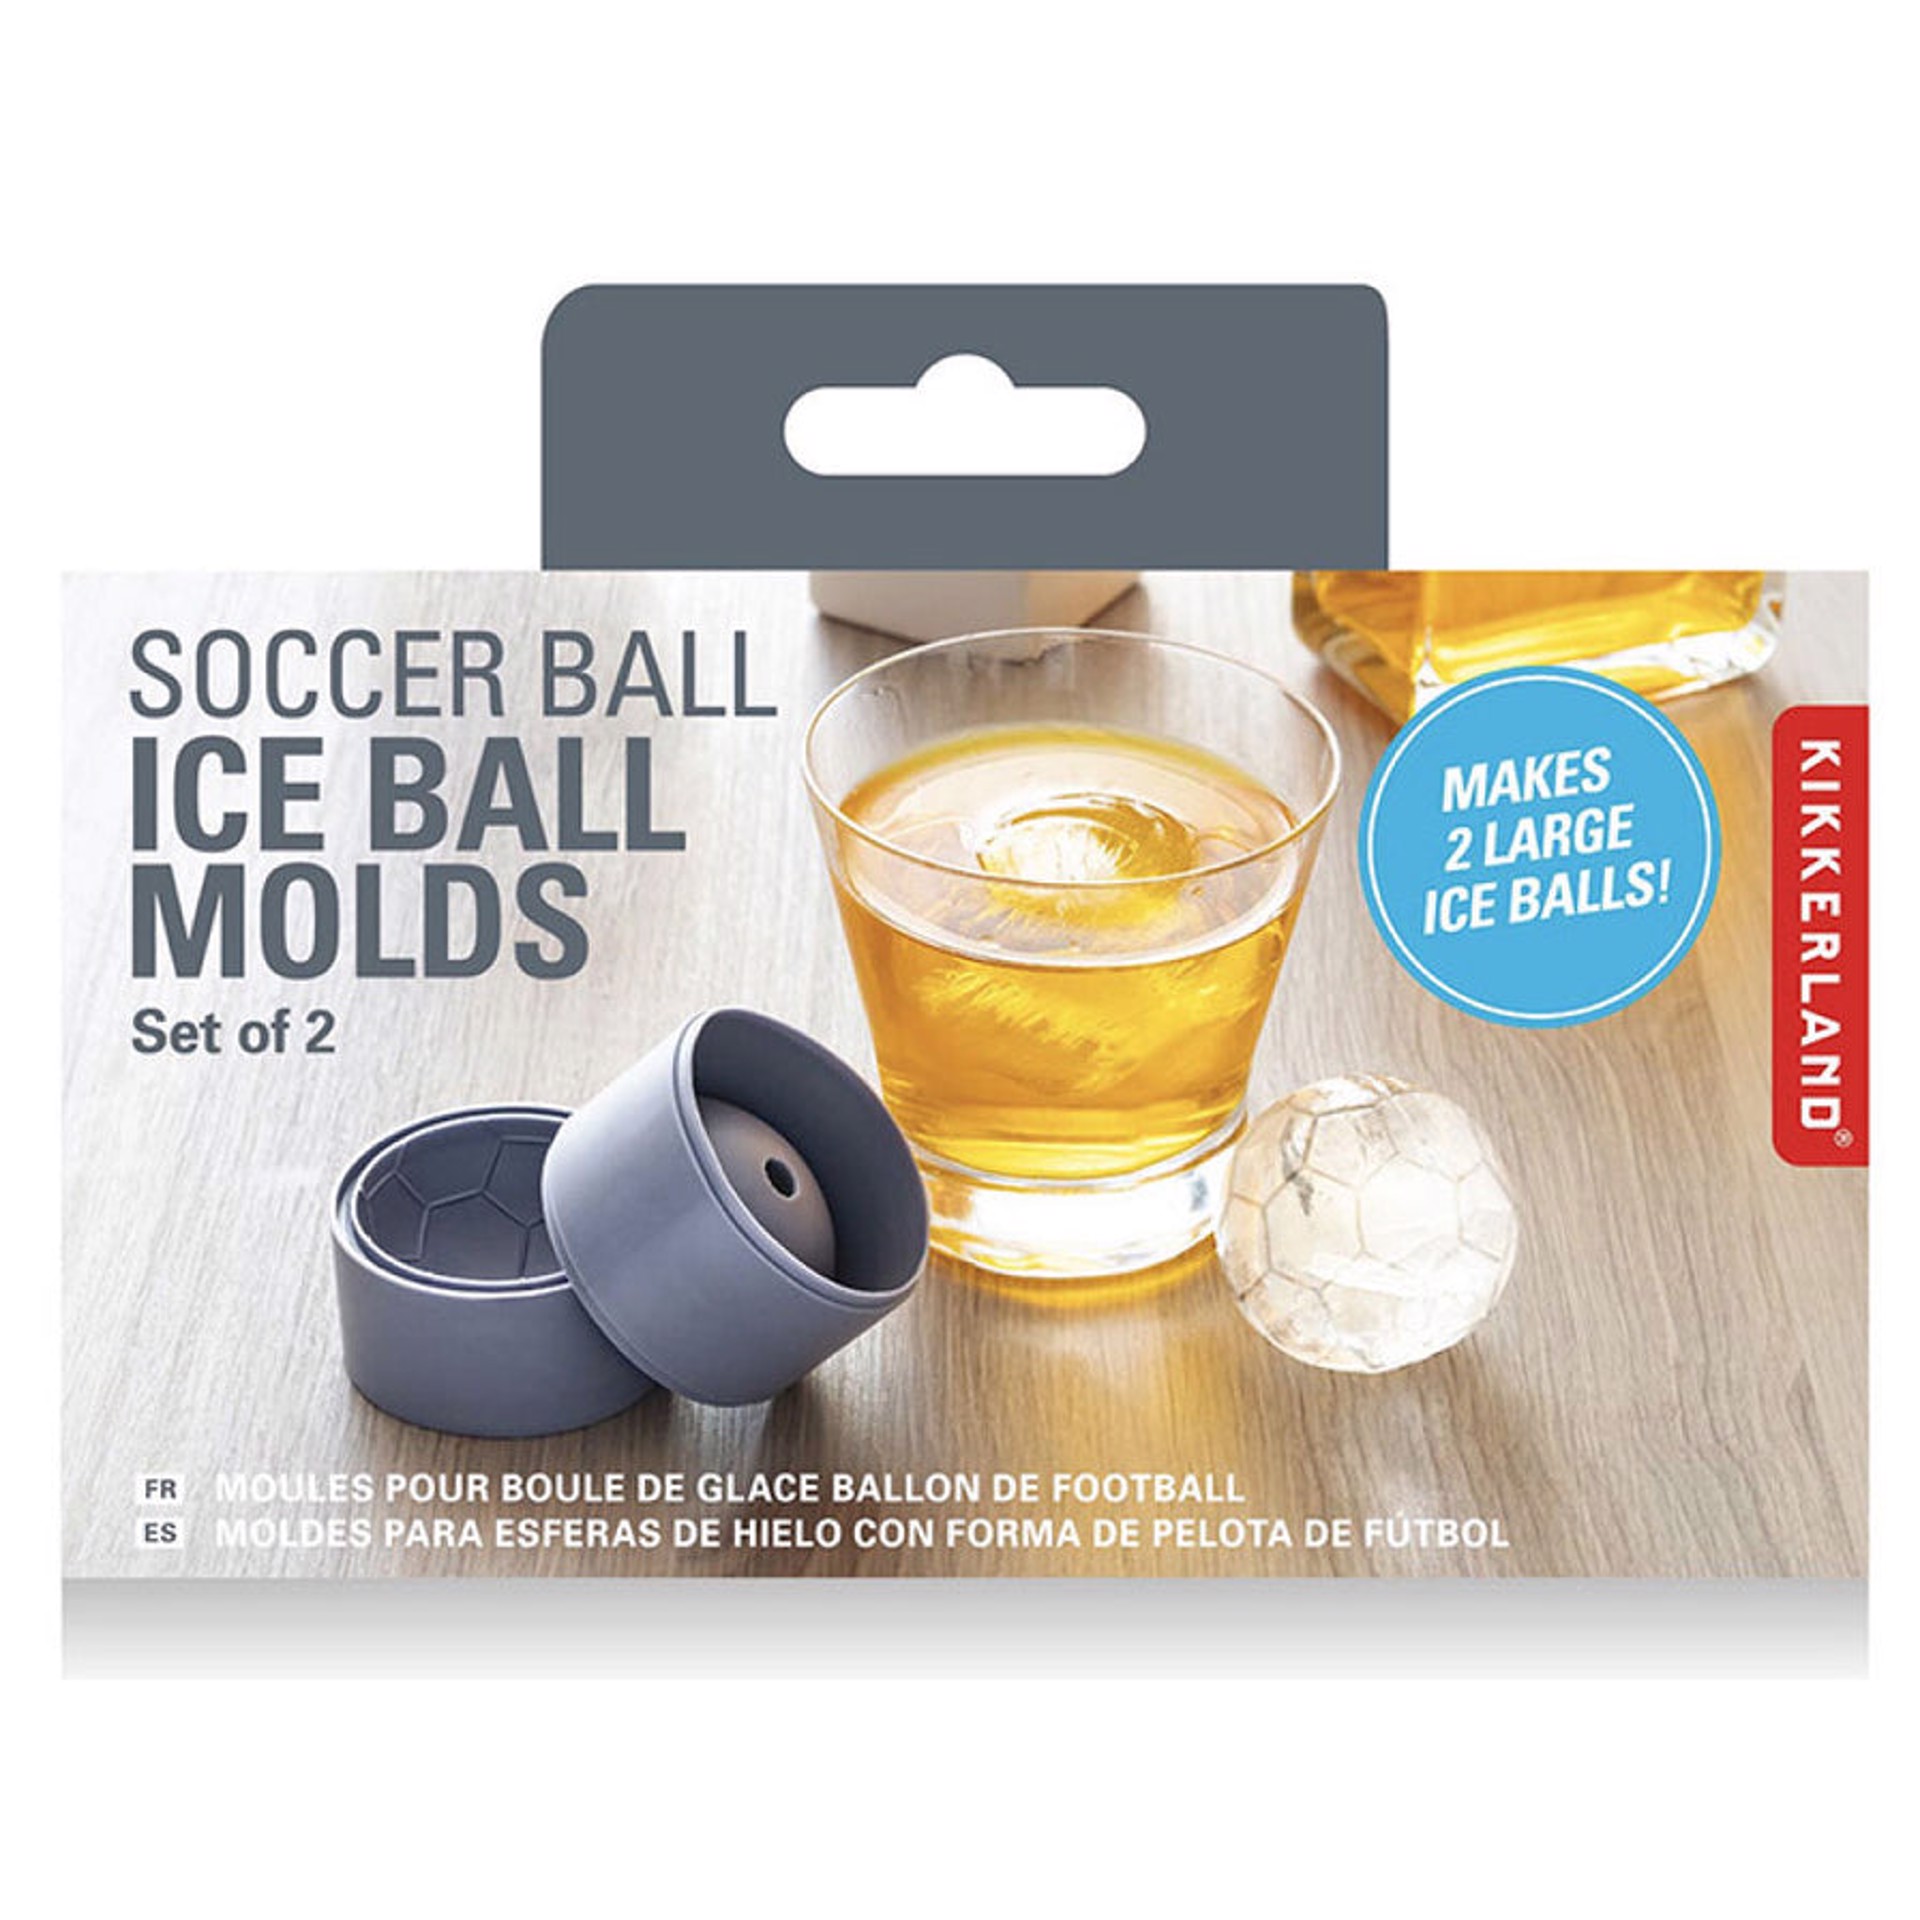 Soccer Ball Ice Molds by Chauvet Arts